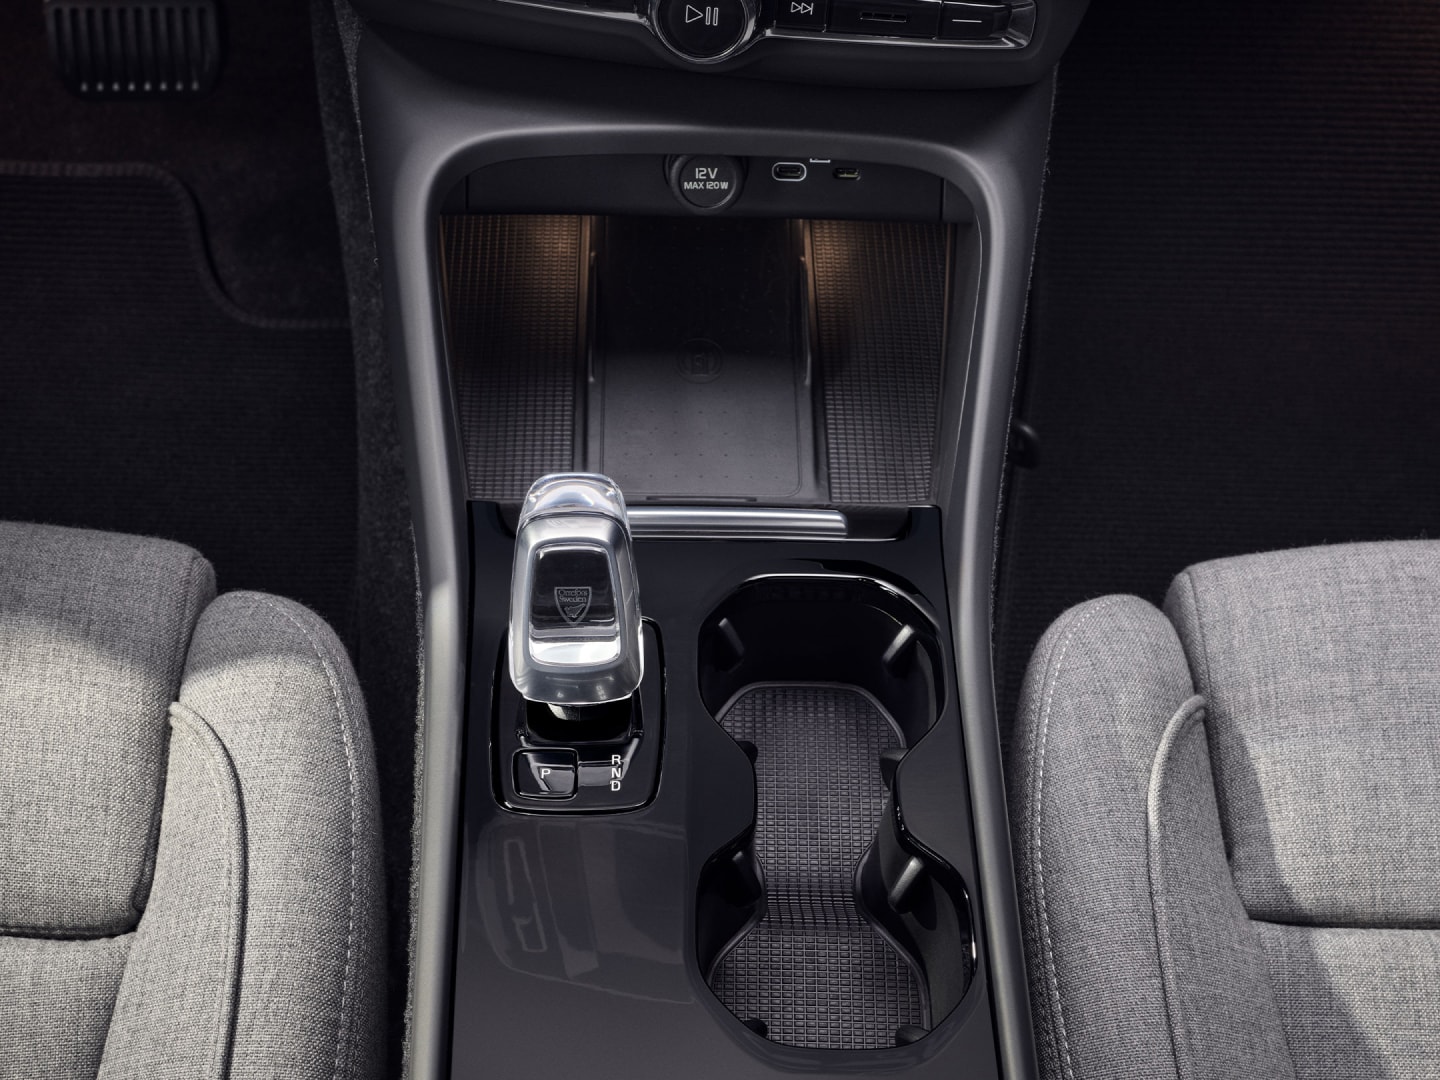 The cupholder, gear shift and wireless charger positioned between the front seats of the fully electric Volvo EC40.